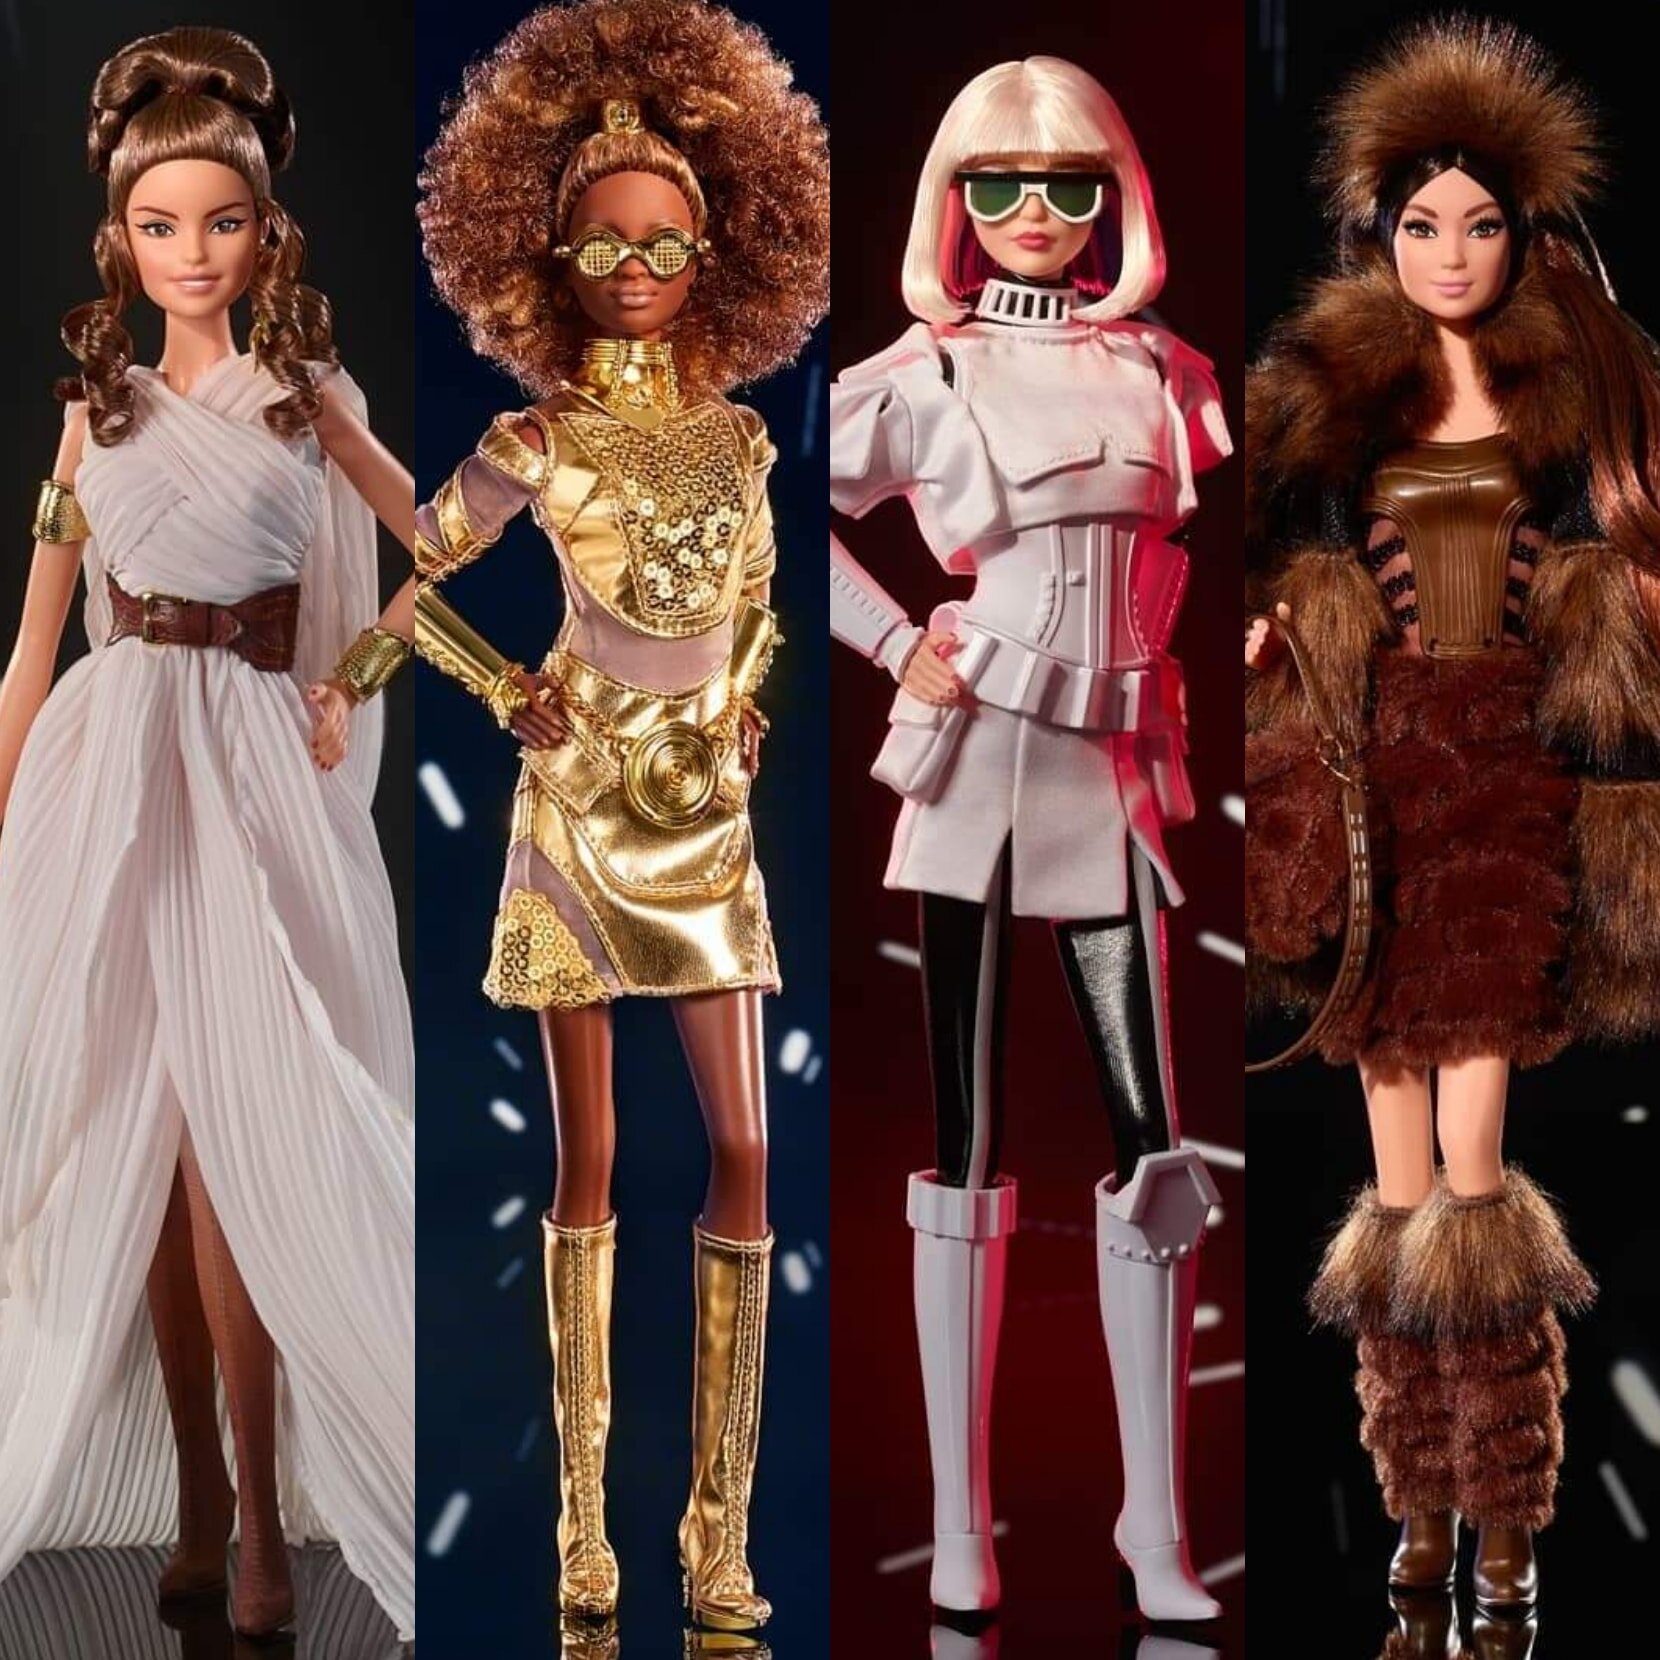 Mattel Just Released the Most Epic Star Wars Barbie Collection